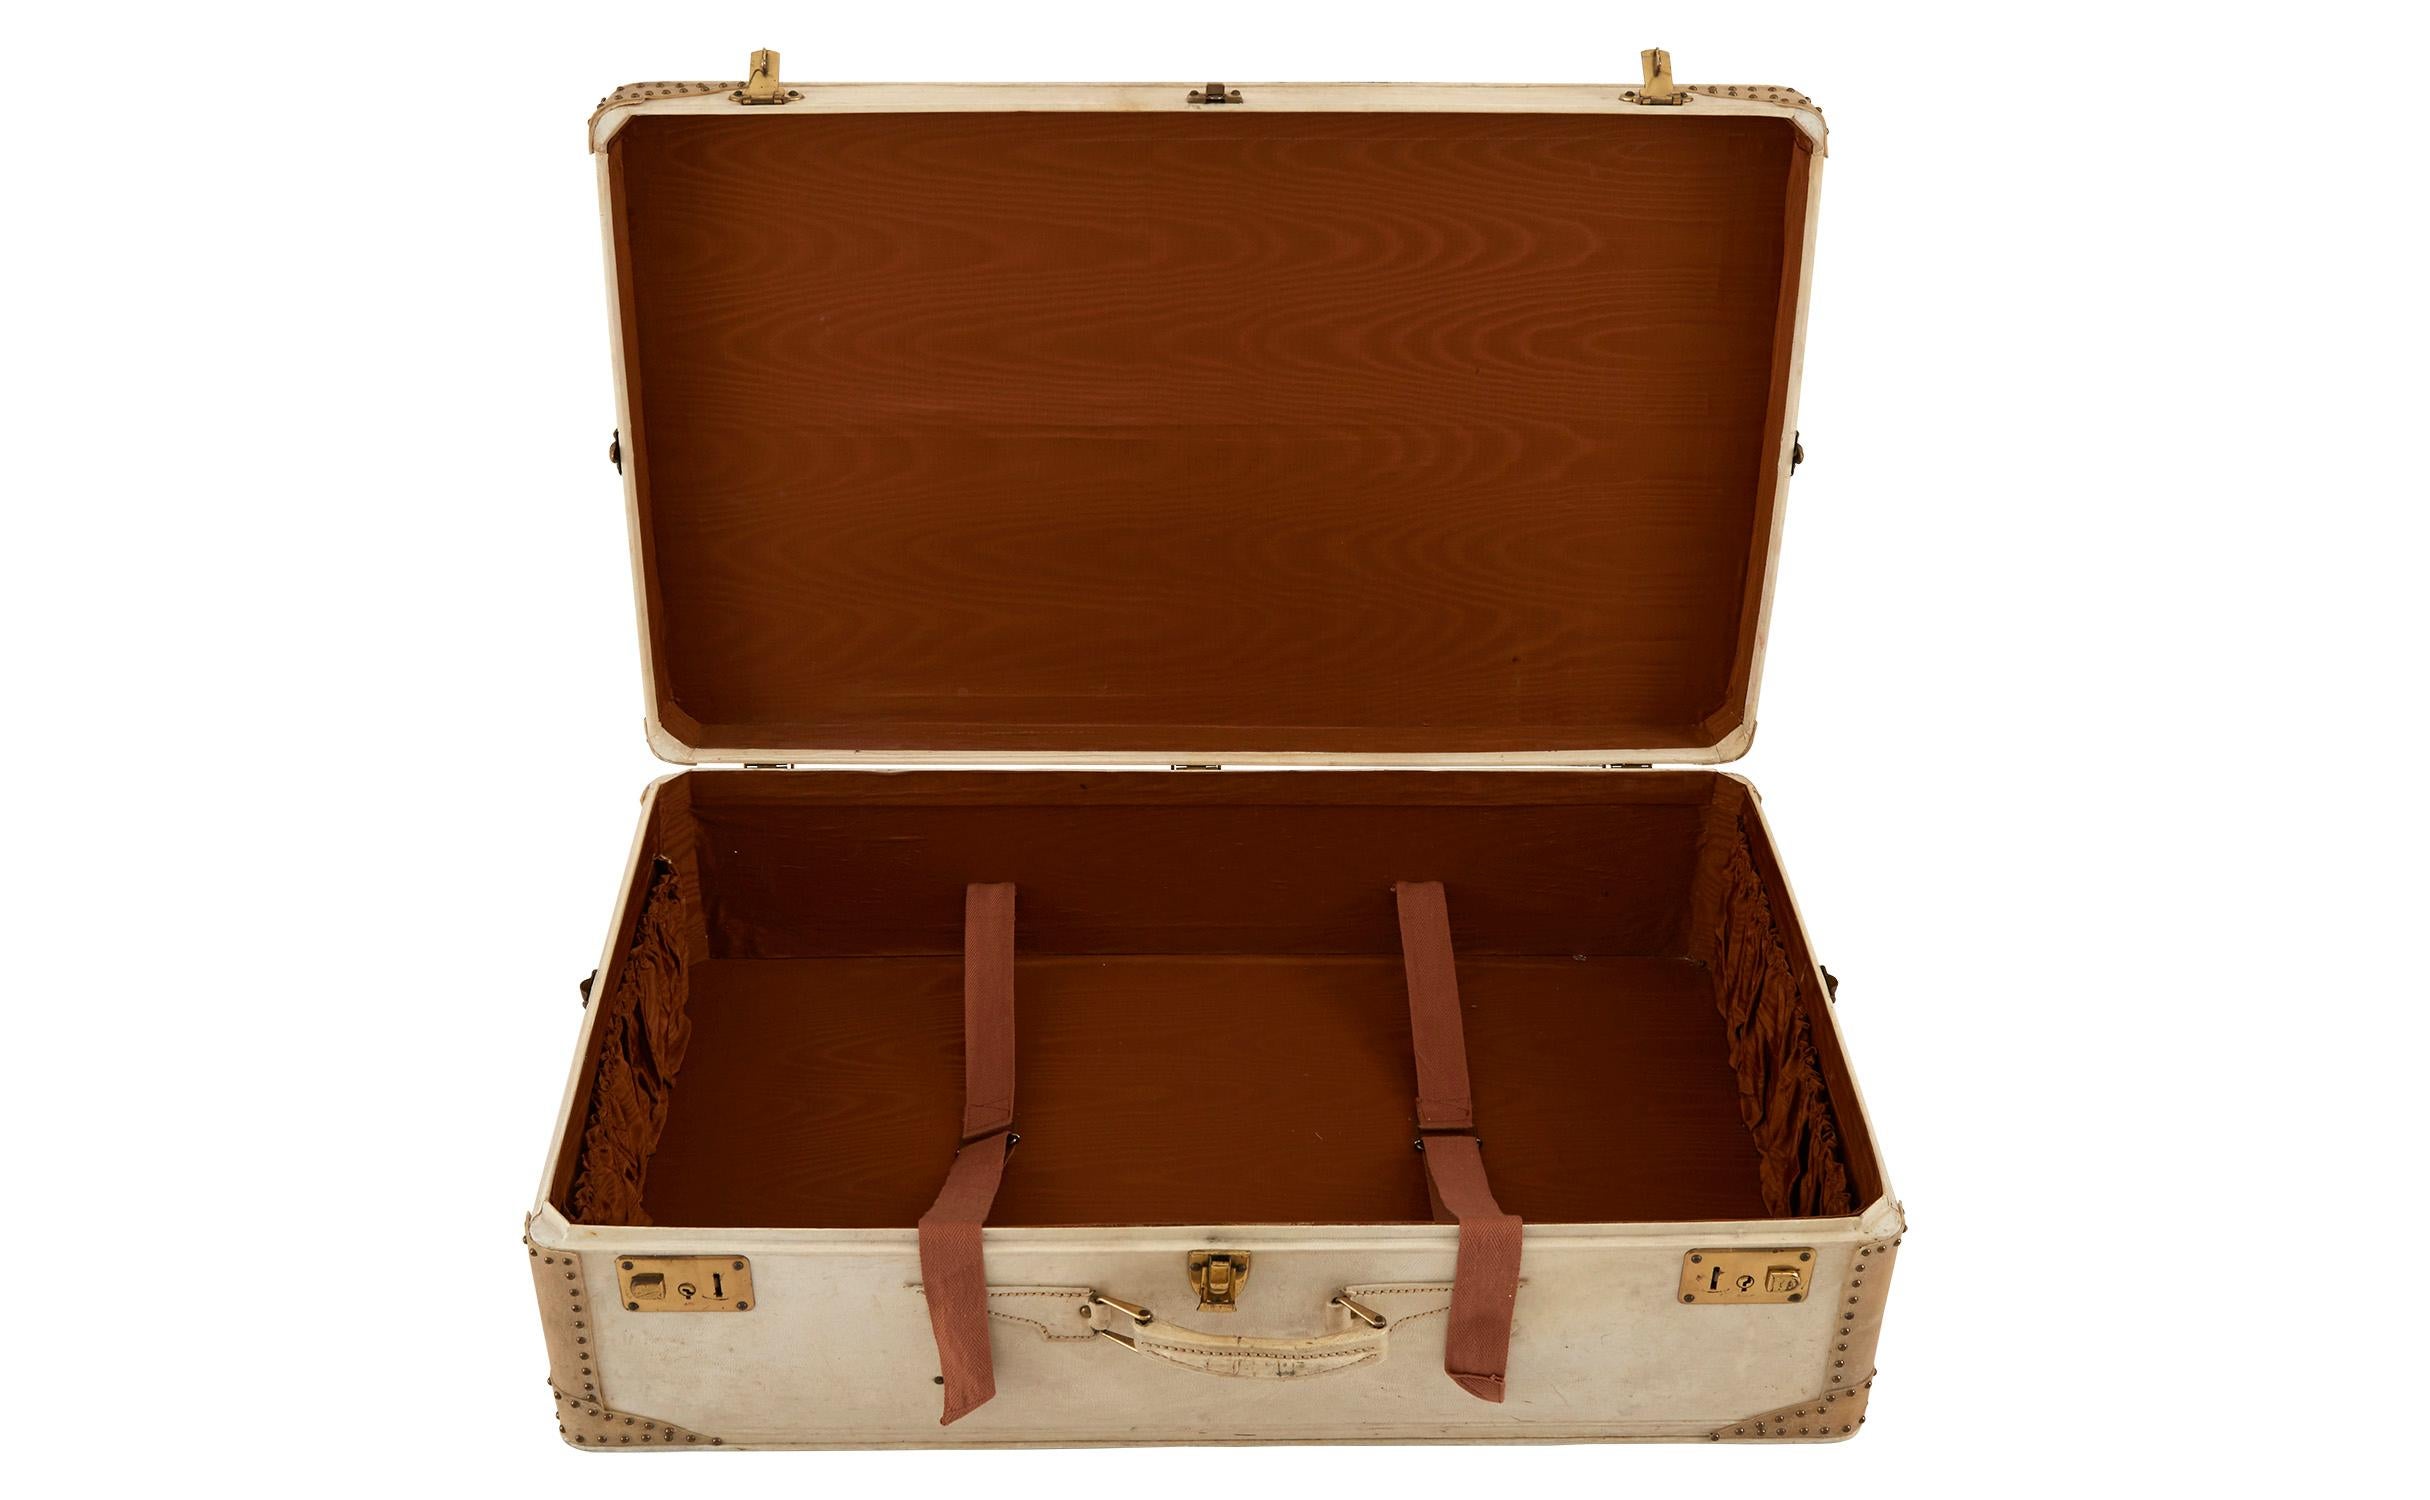 Lavoët Cream Leather Valise Suitcase with Satin Lining 1